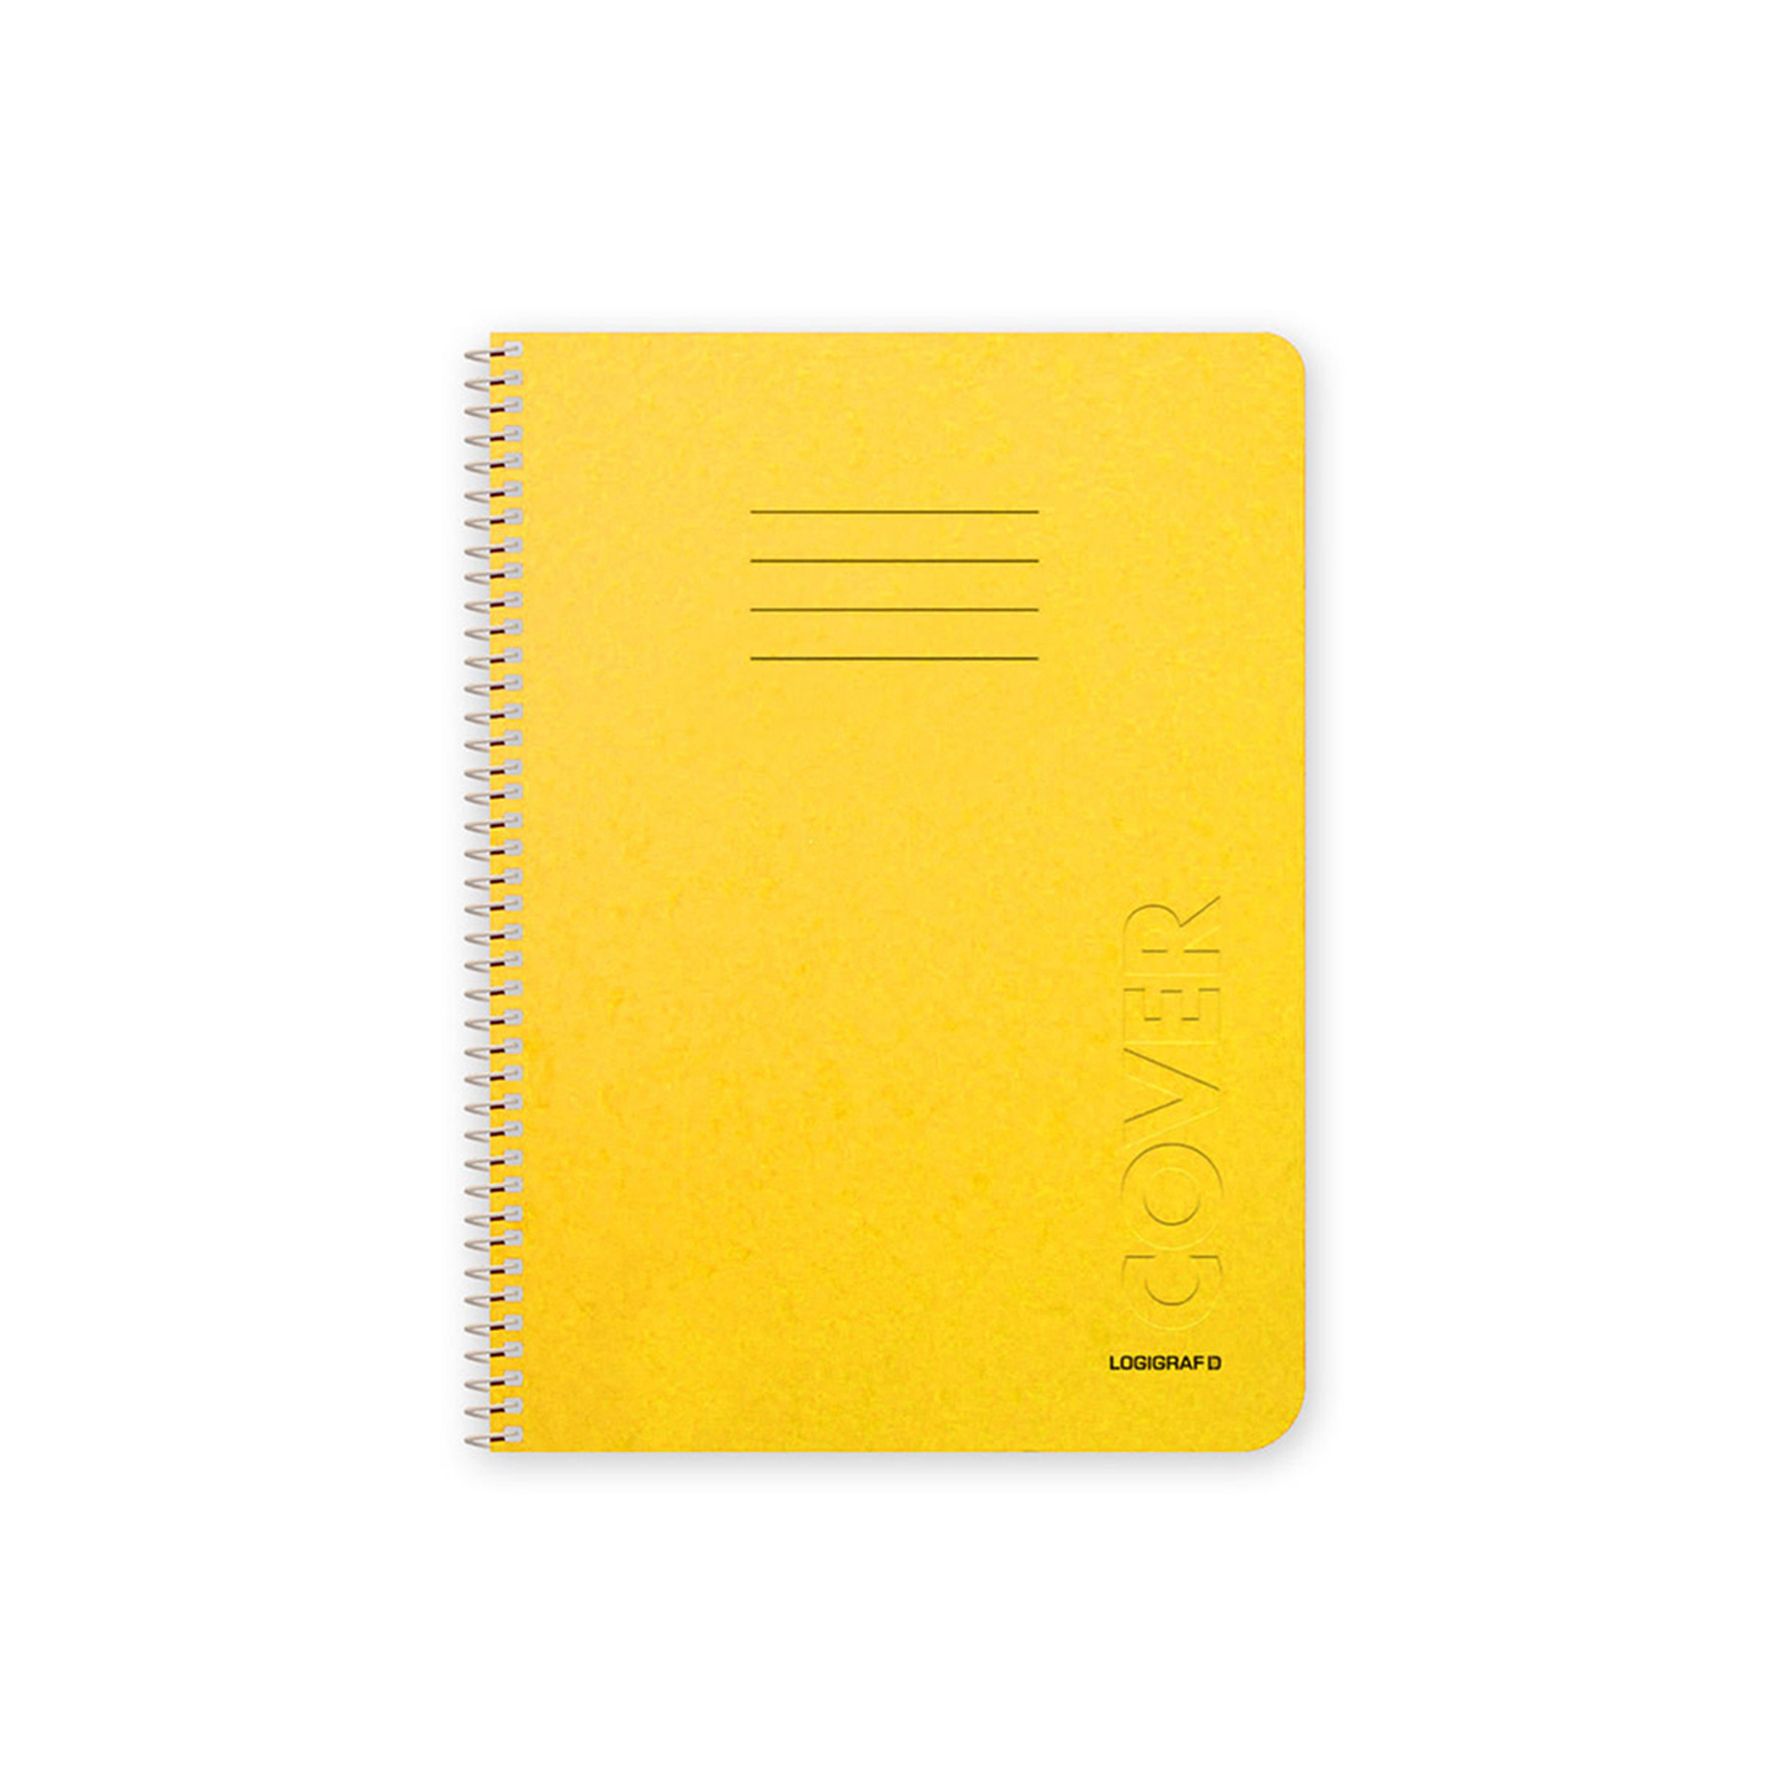 COVER Wirelock Notebook B5/17Χ25 5 Subjects 150 Sheets 11 colors